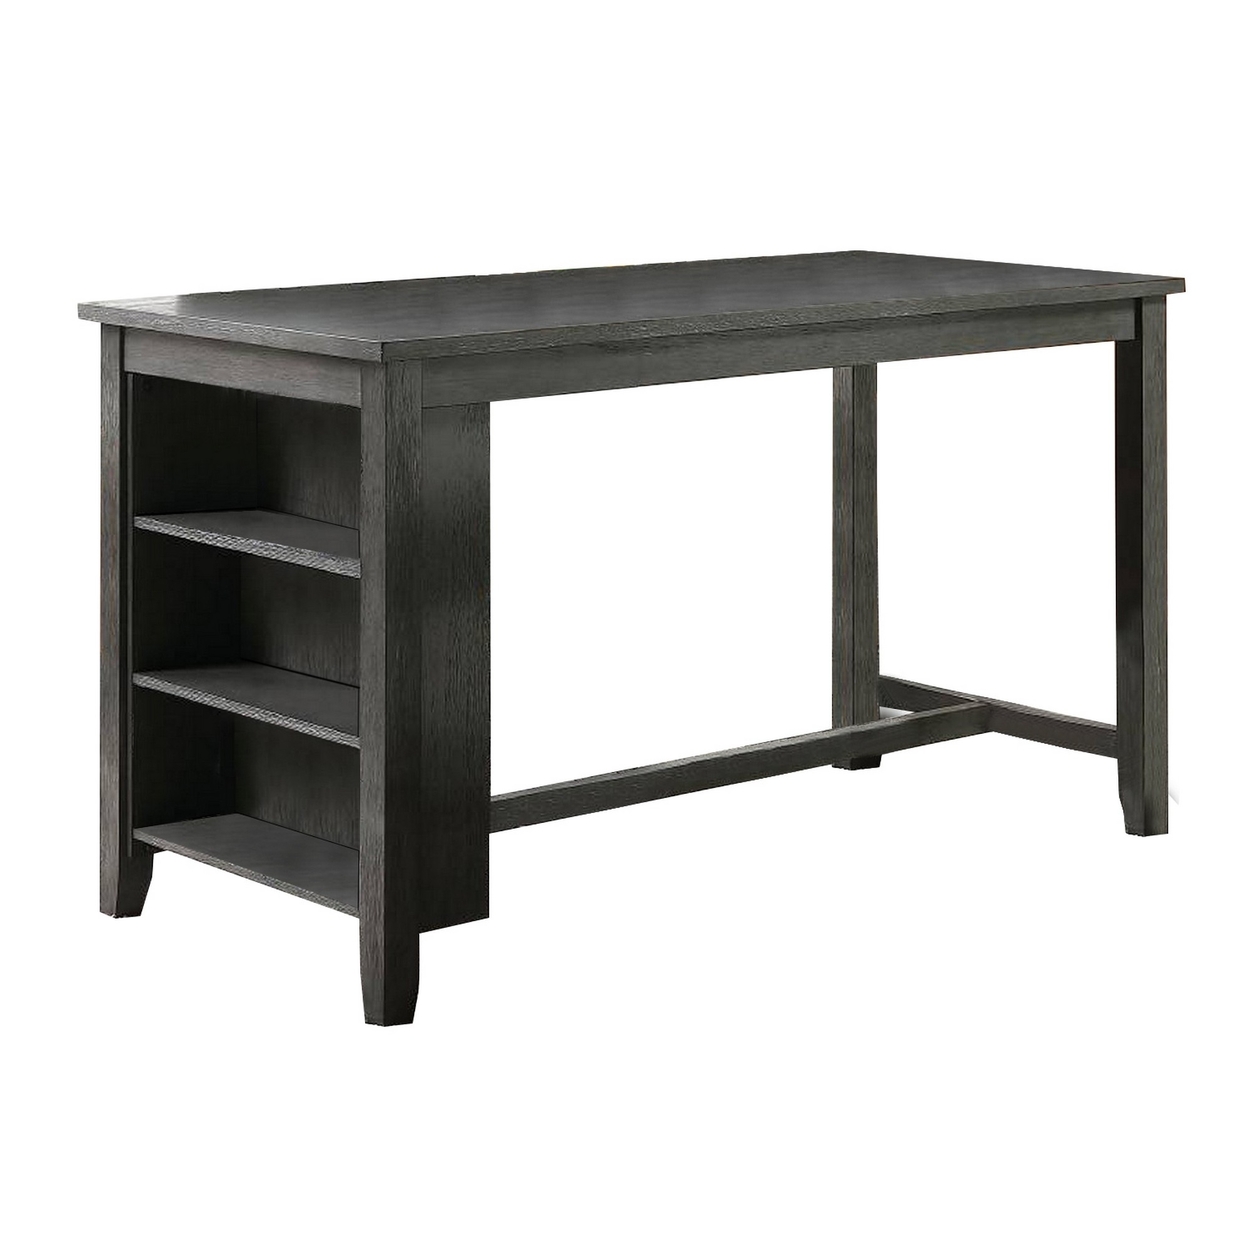 Wooden Counter Height Table With Three Storage Shelves, Gray- Saltoro Sherpi